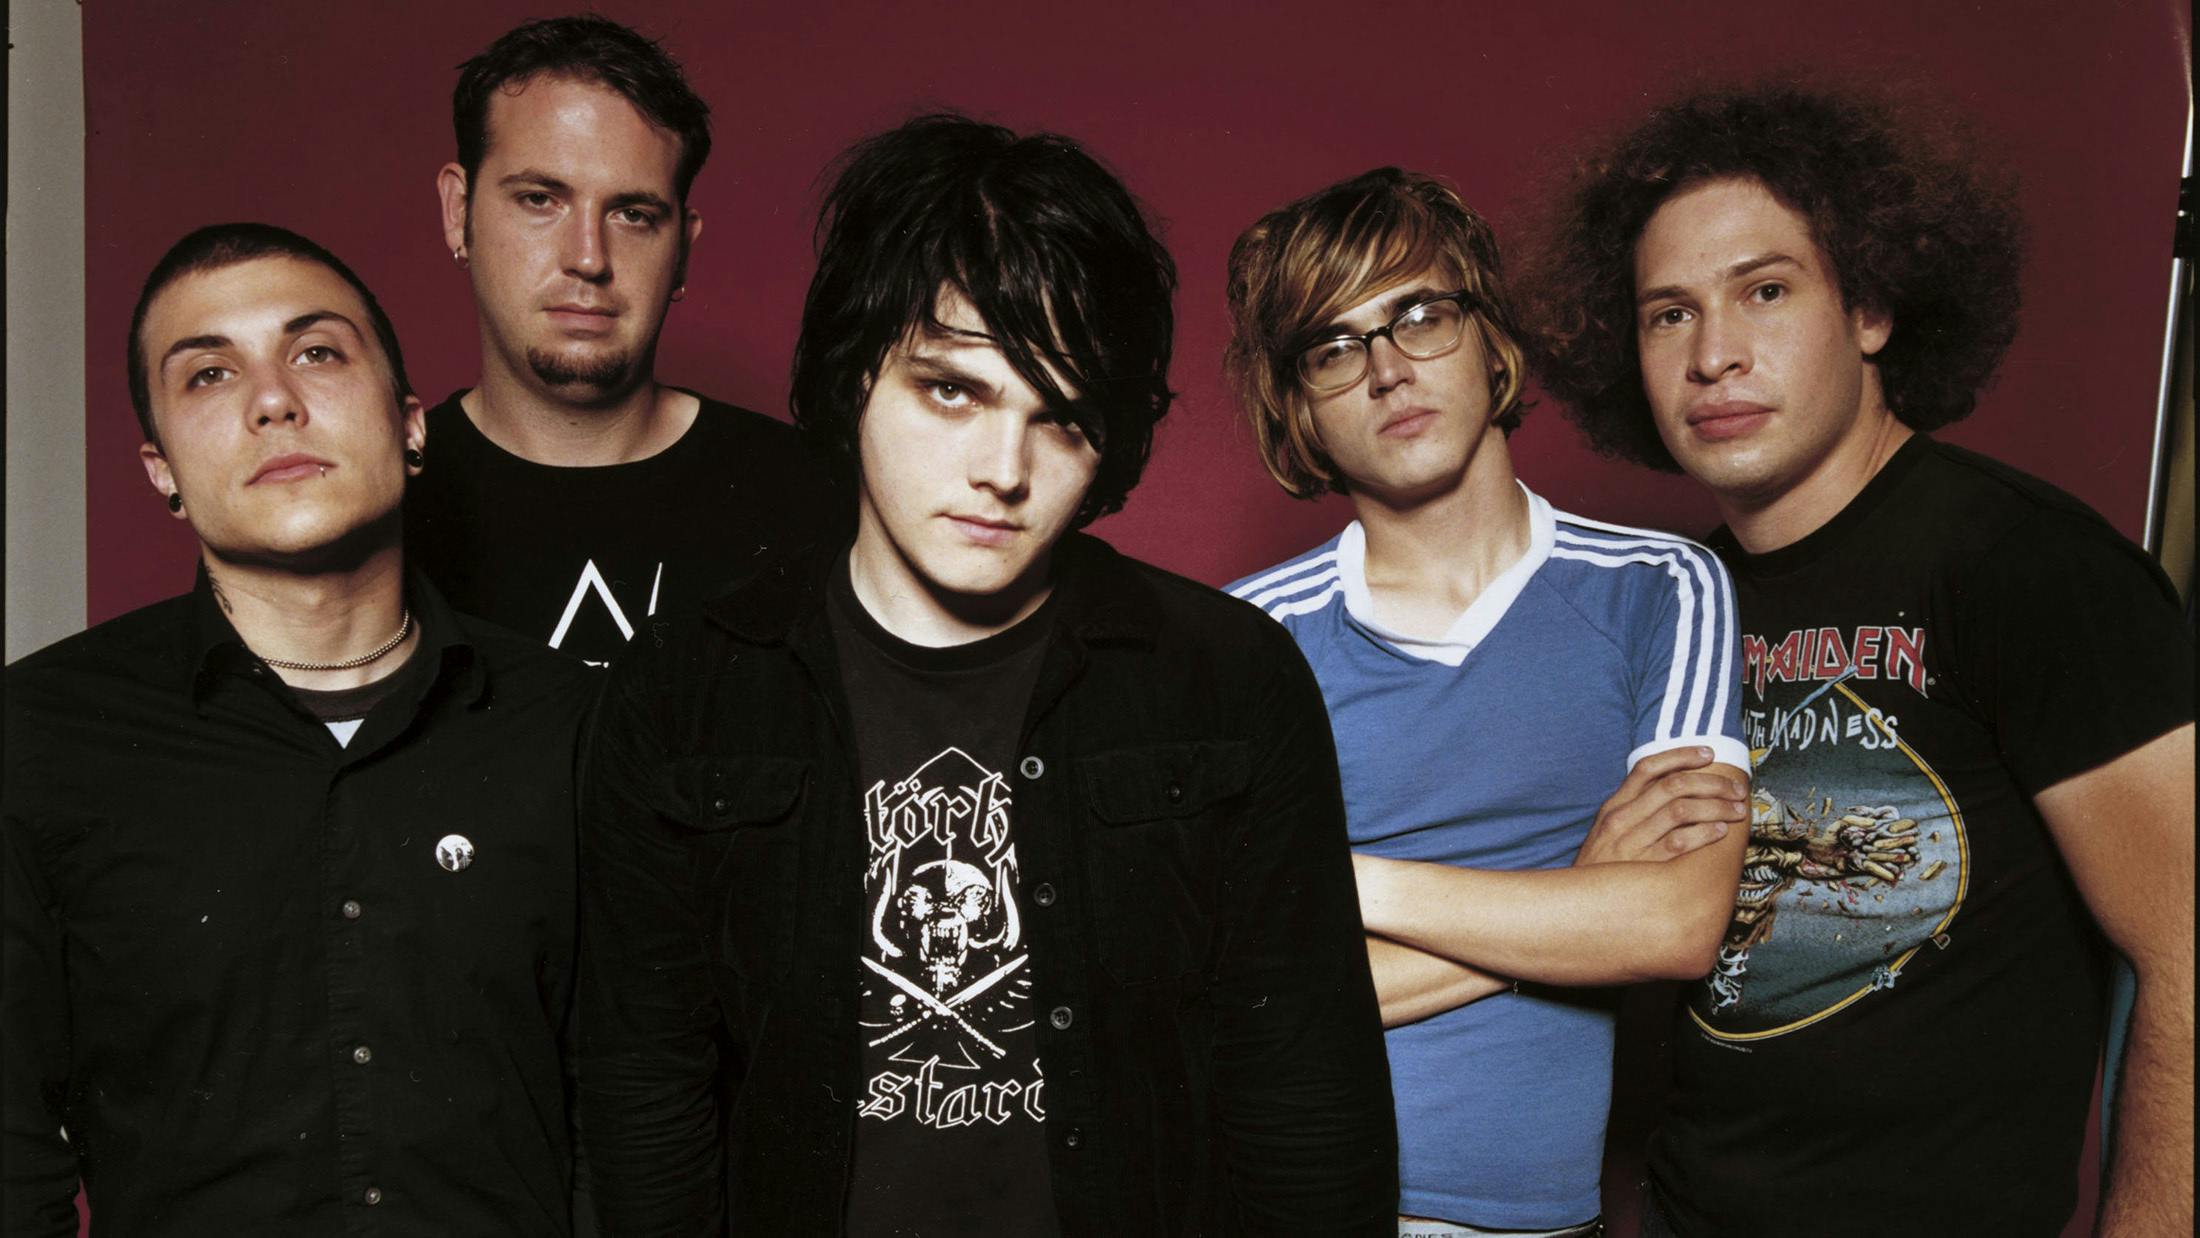 The changing faces of My Chemical Romance